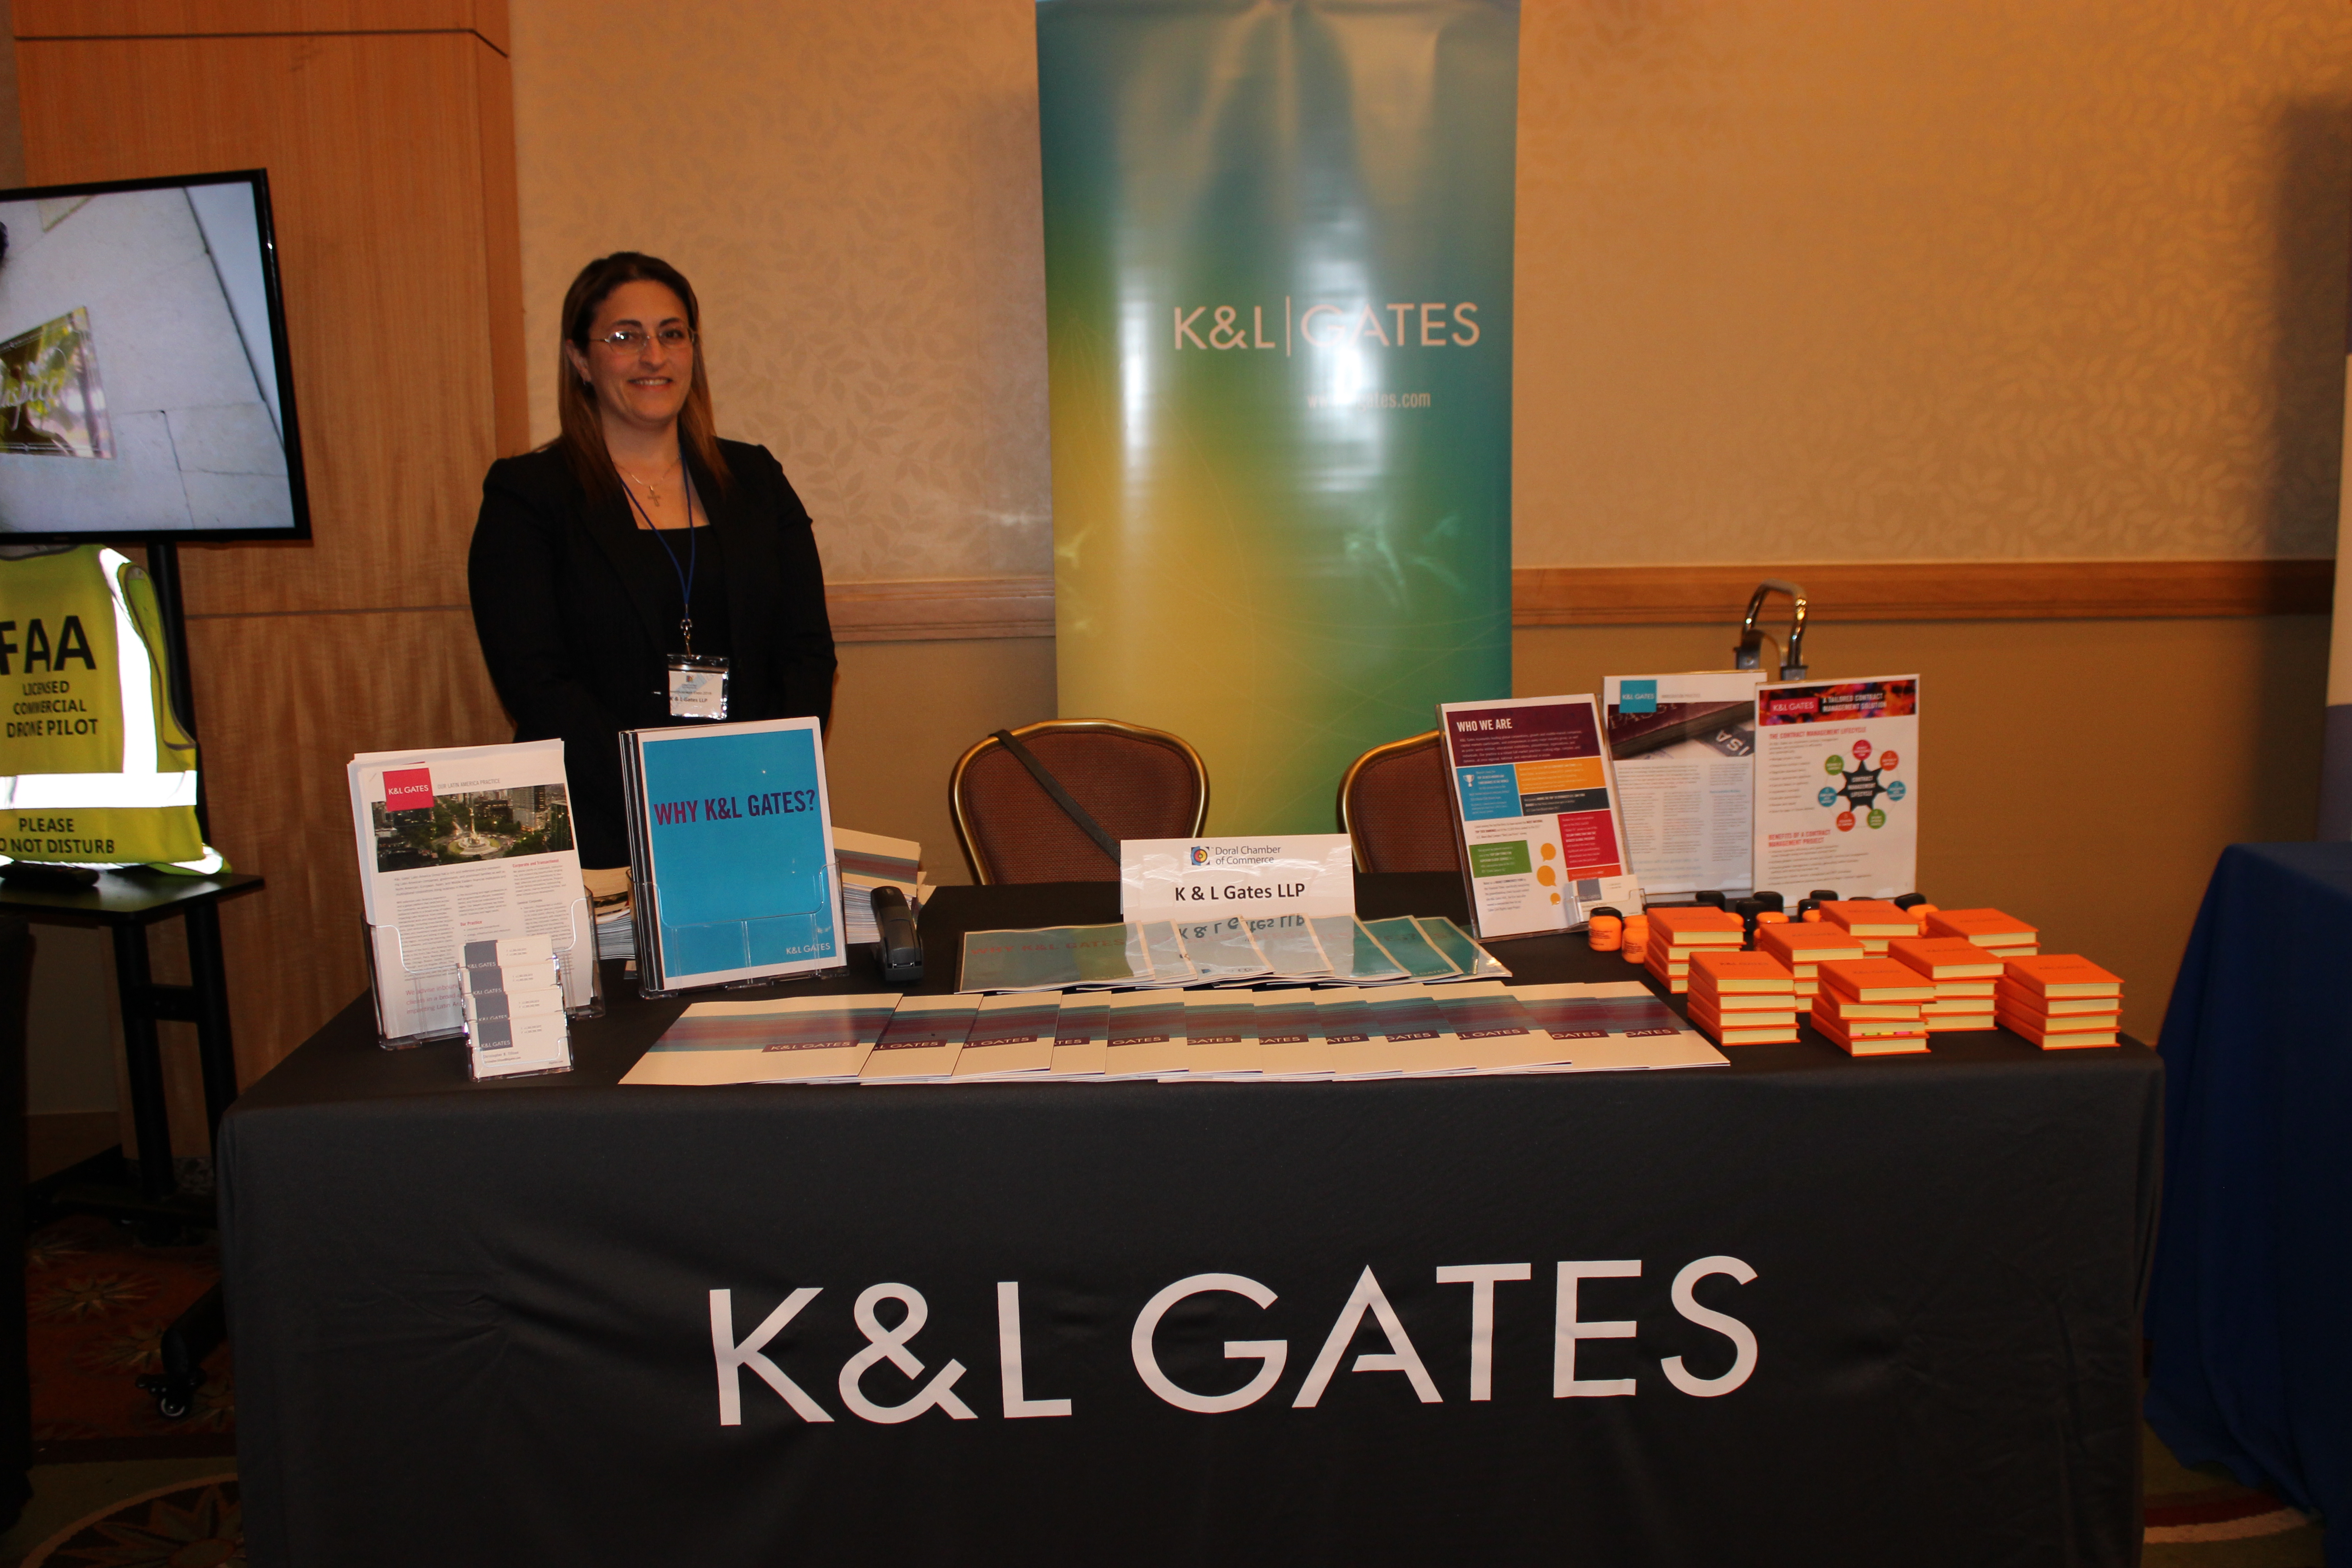 K&L Gates representing business in ExpoMiami 2018 hosted by the Doral Chamber of Commerce.